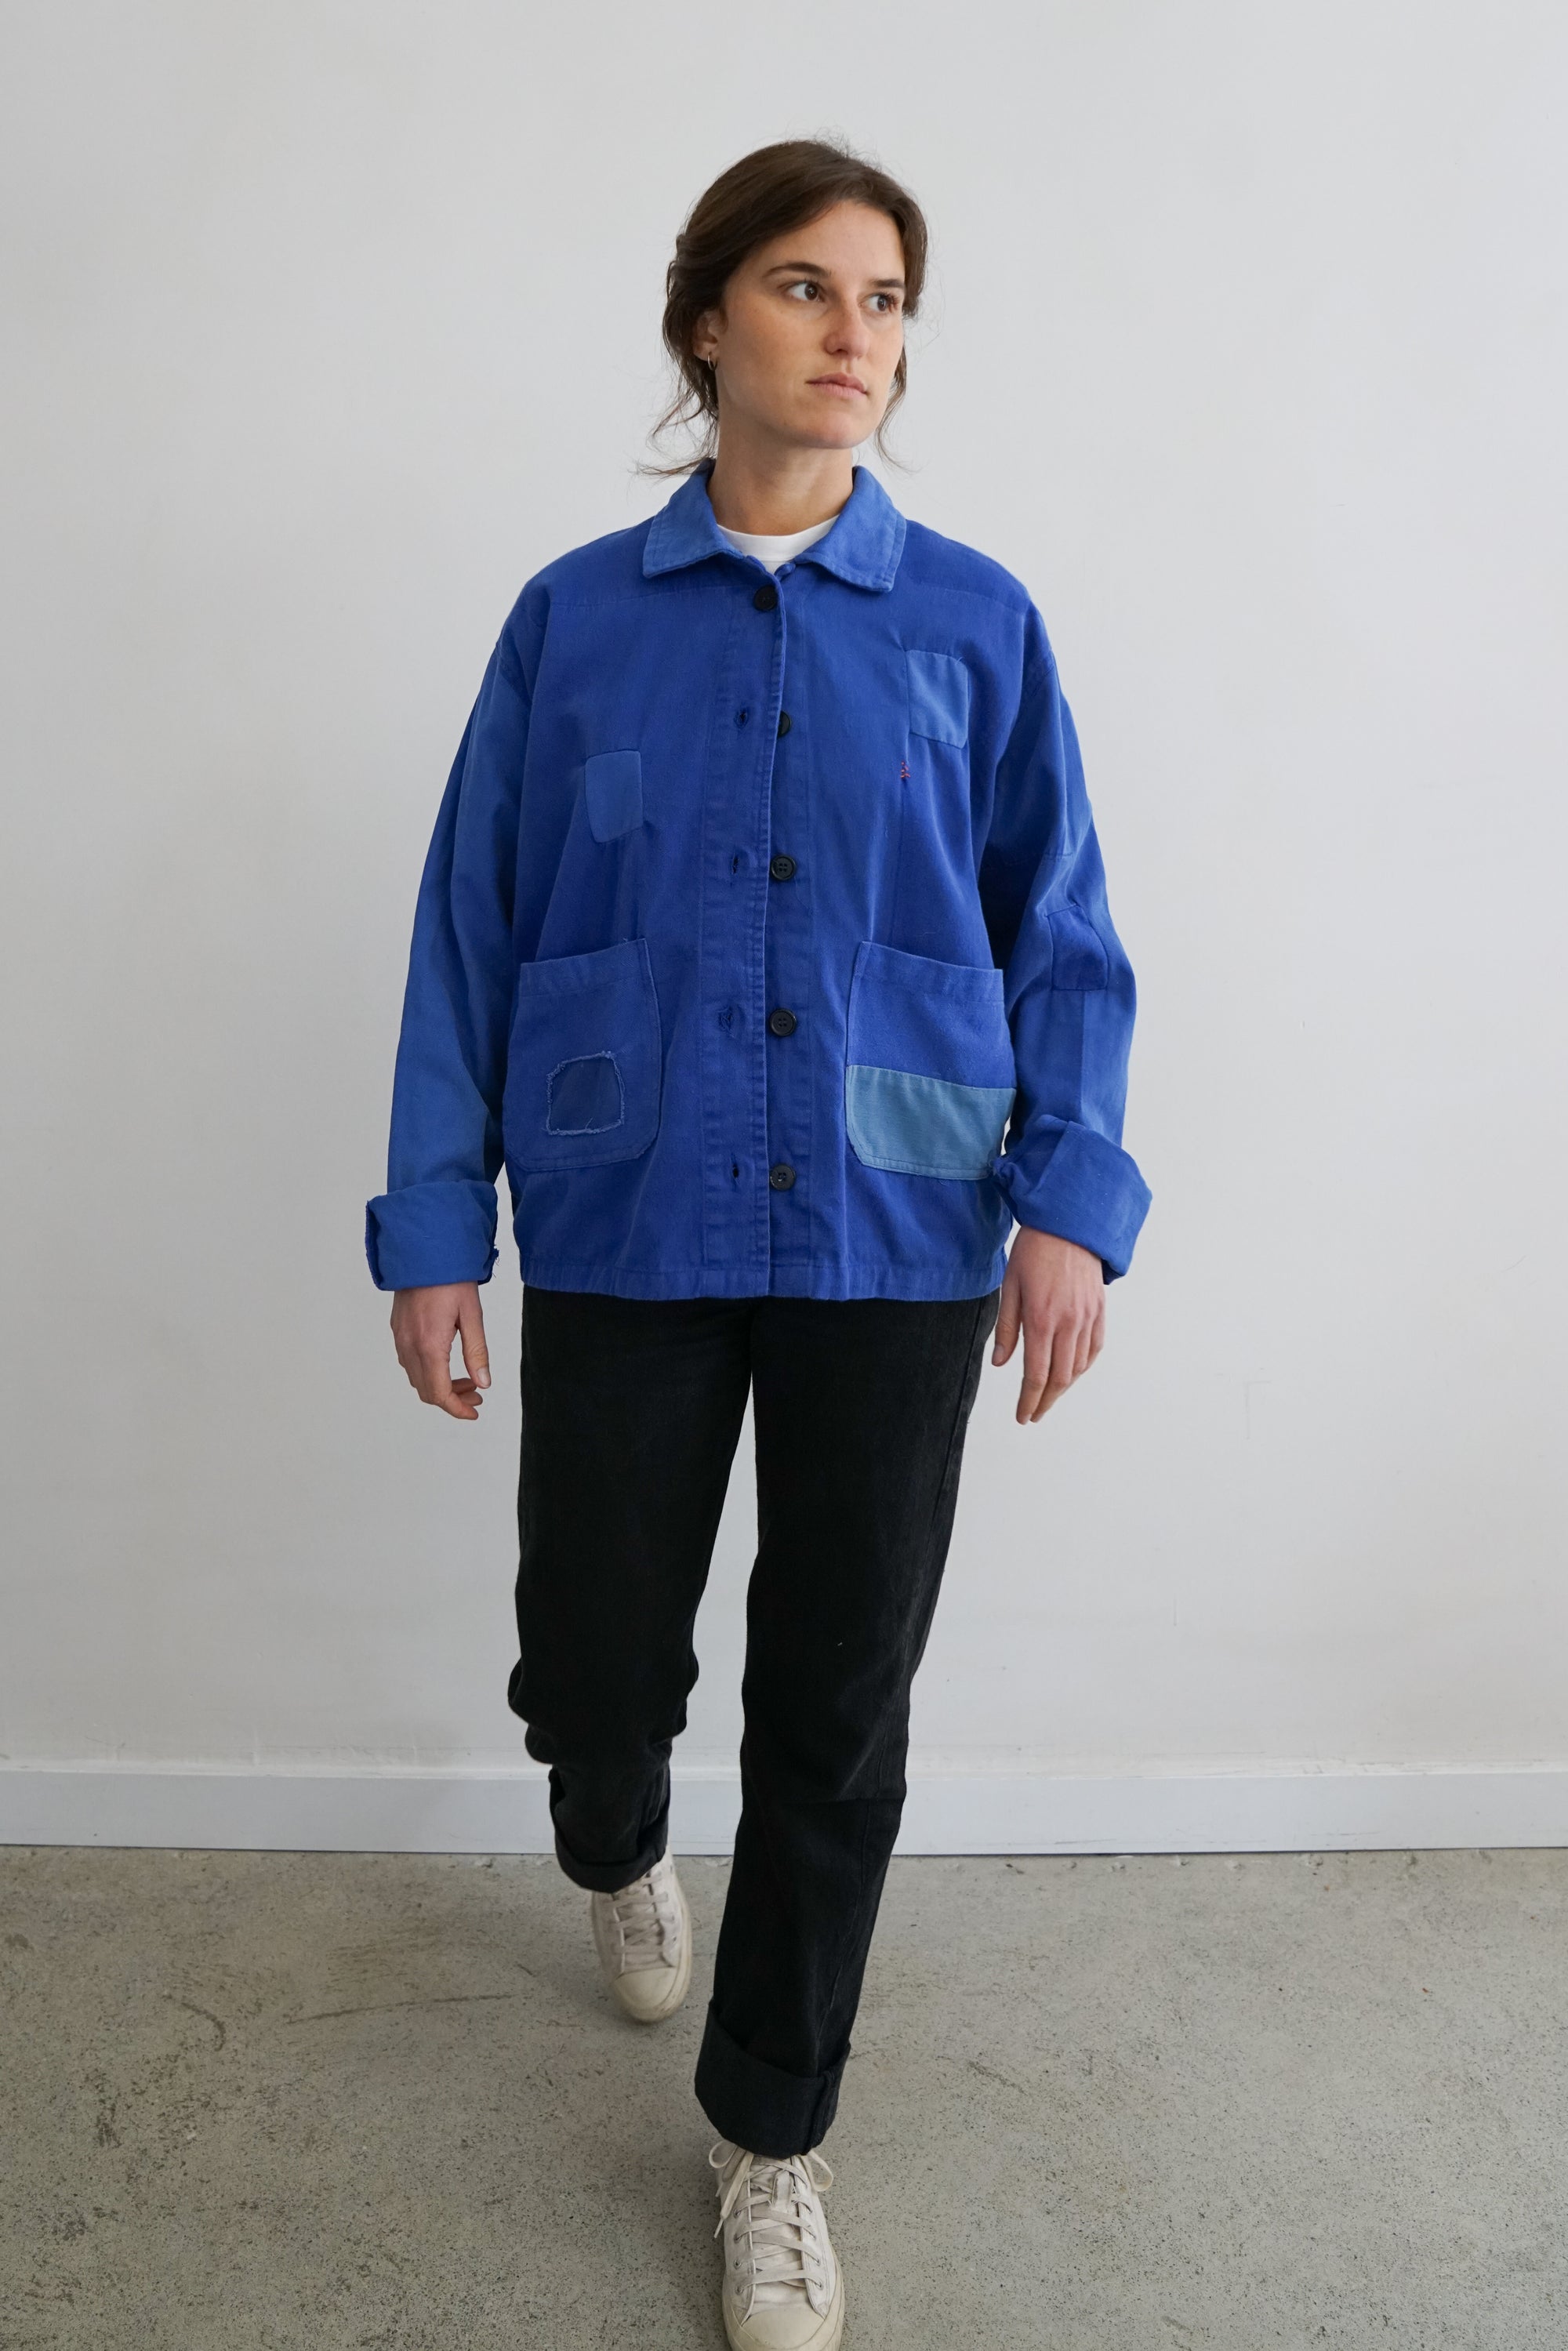 Repaired Vintage French Workwear Jacket